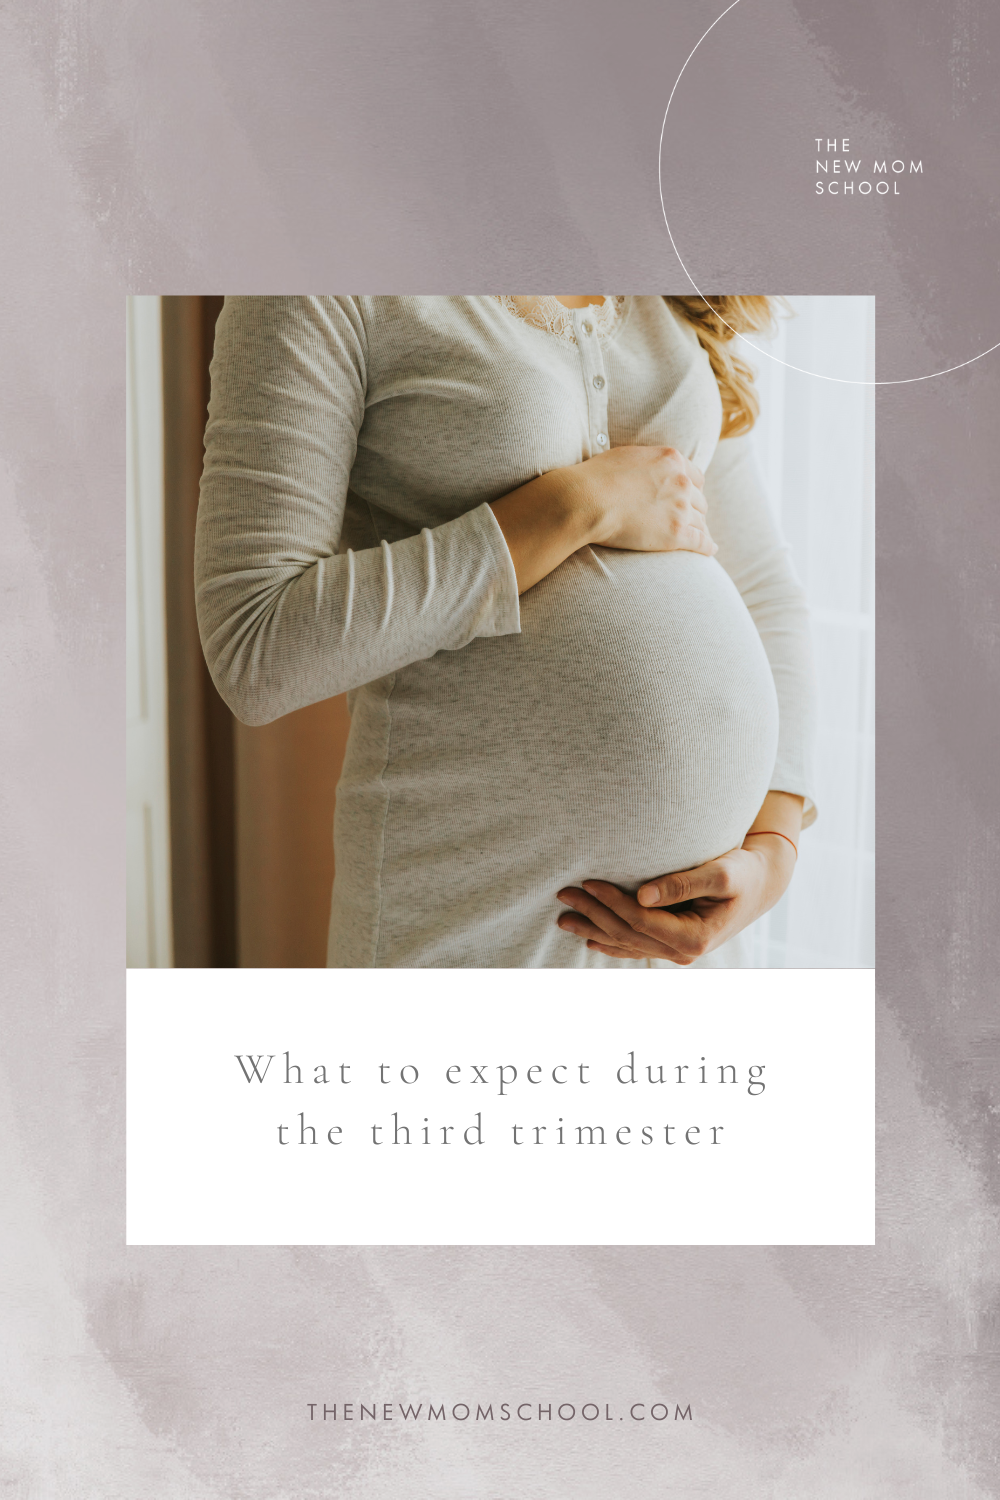 What to expect during the third trimester - New Mom School